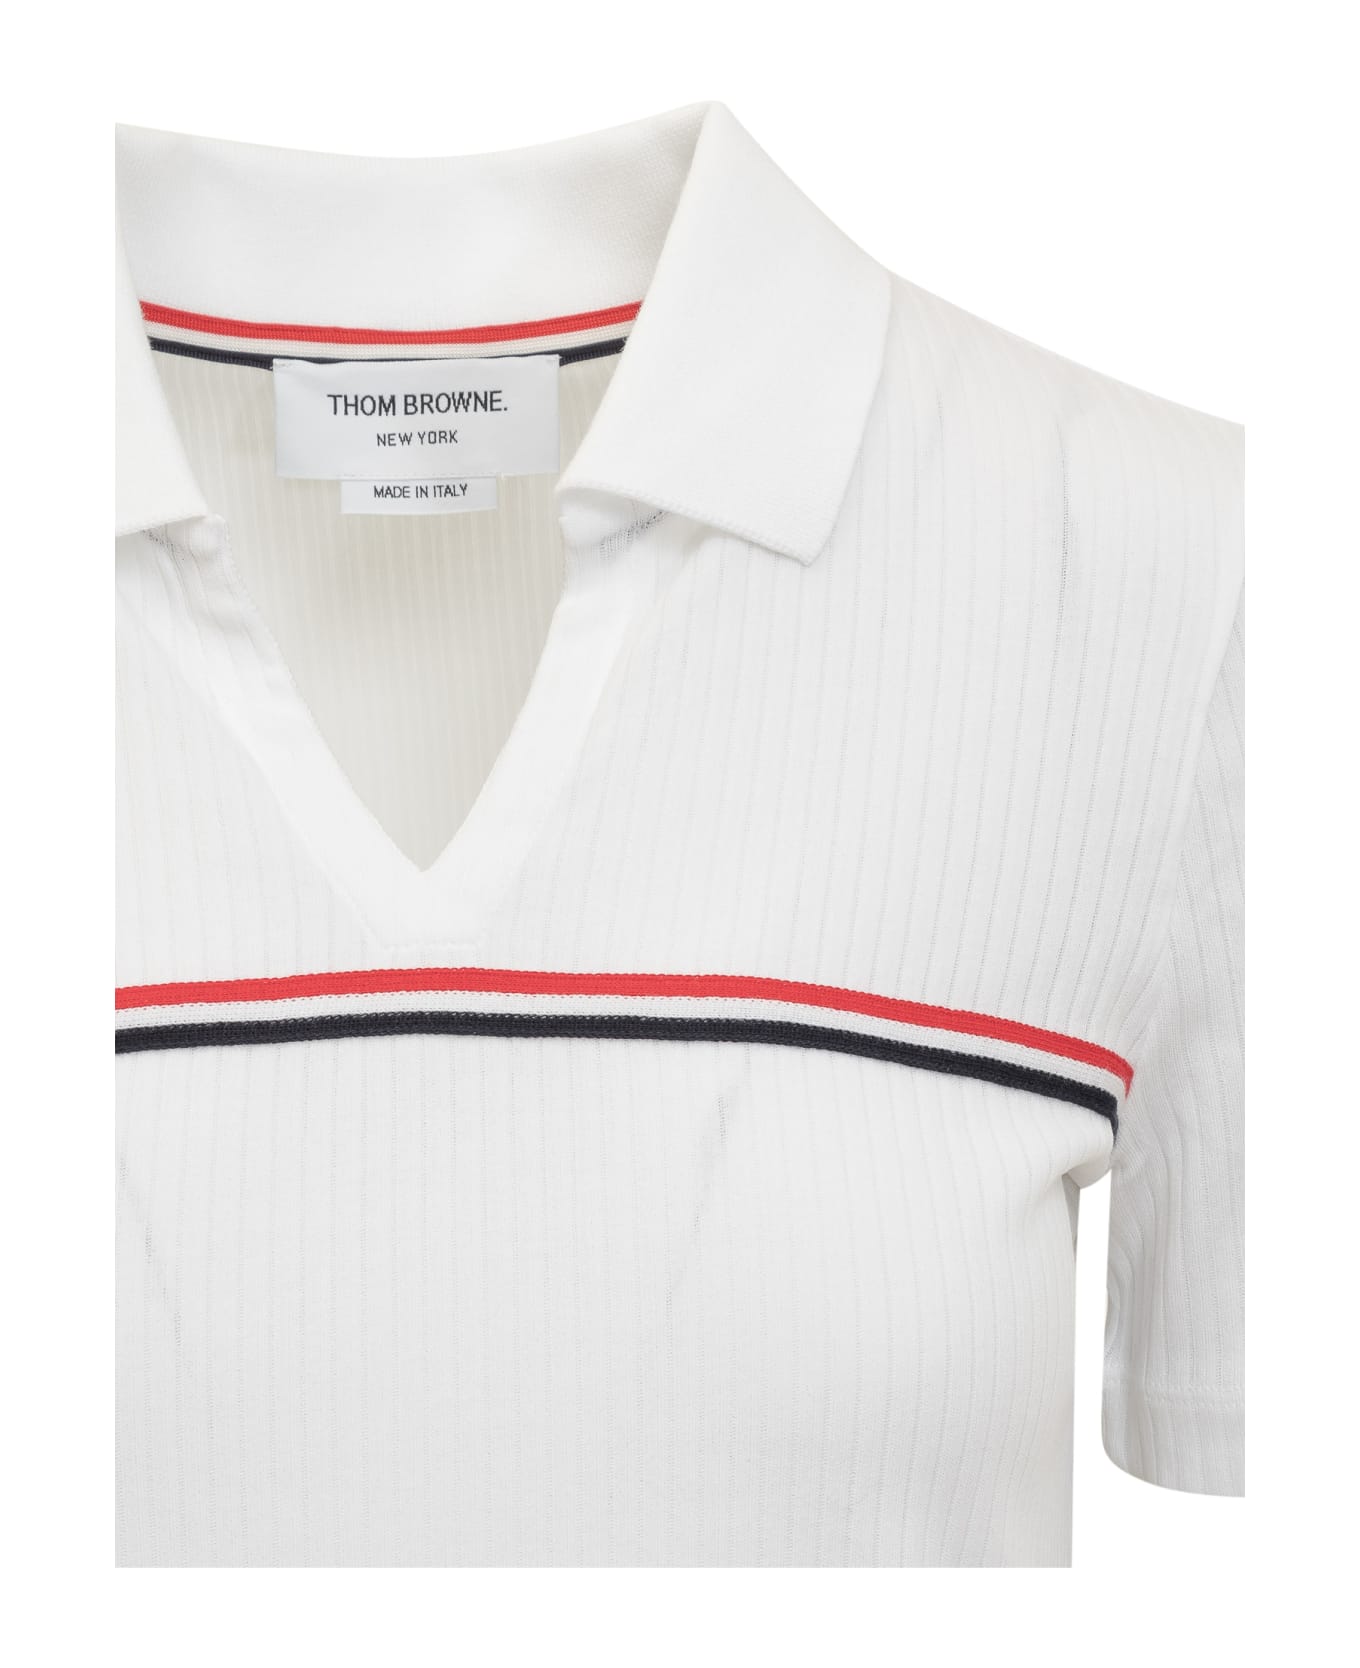 Thom Browne S/s Polo With Web Stripes - White